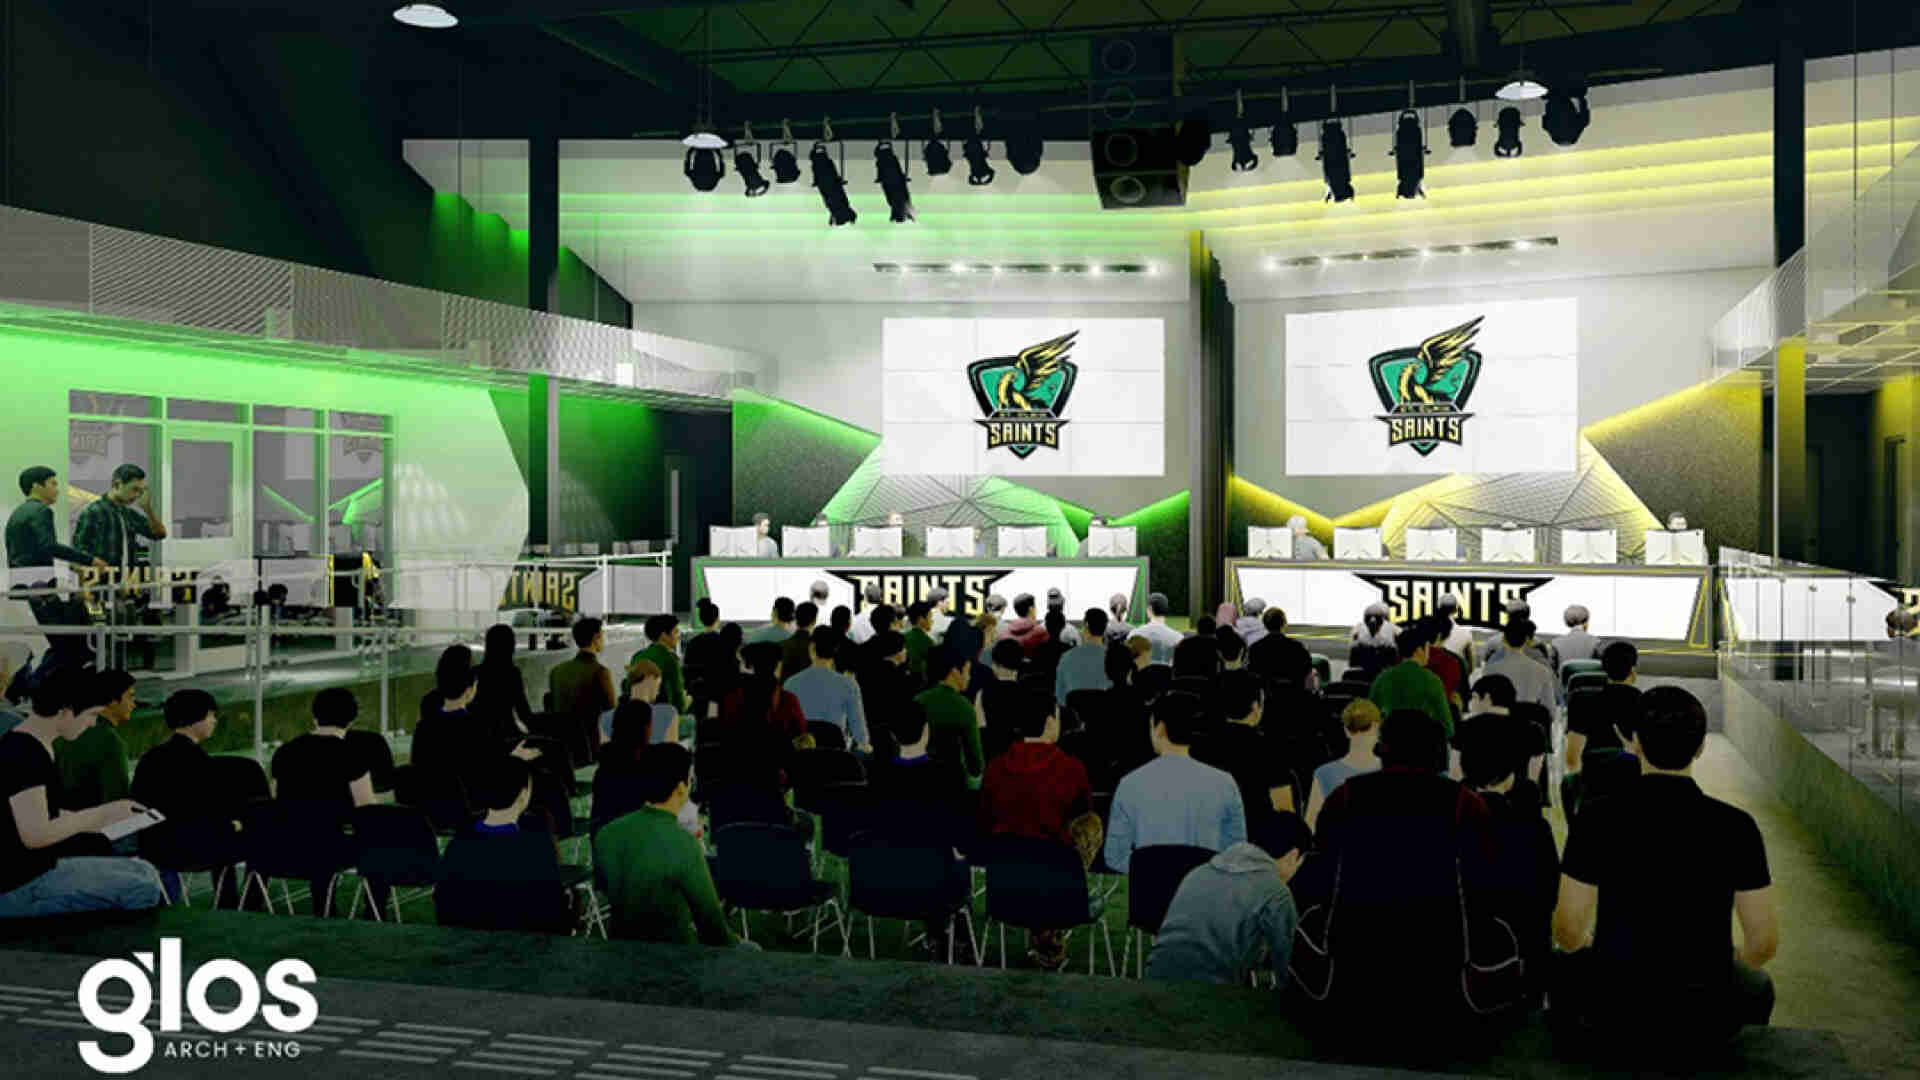 Innovation & News - st-clair-college-esports-arena-concept-2